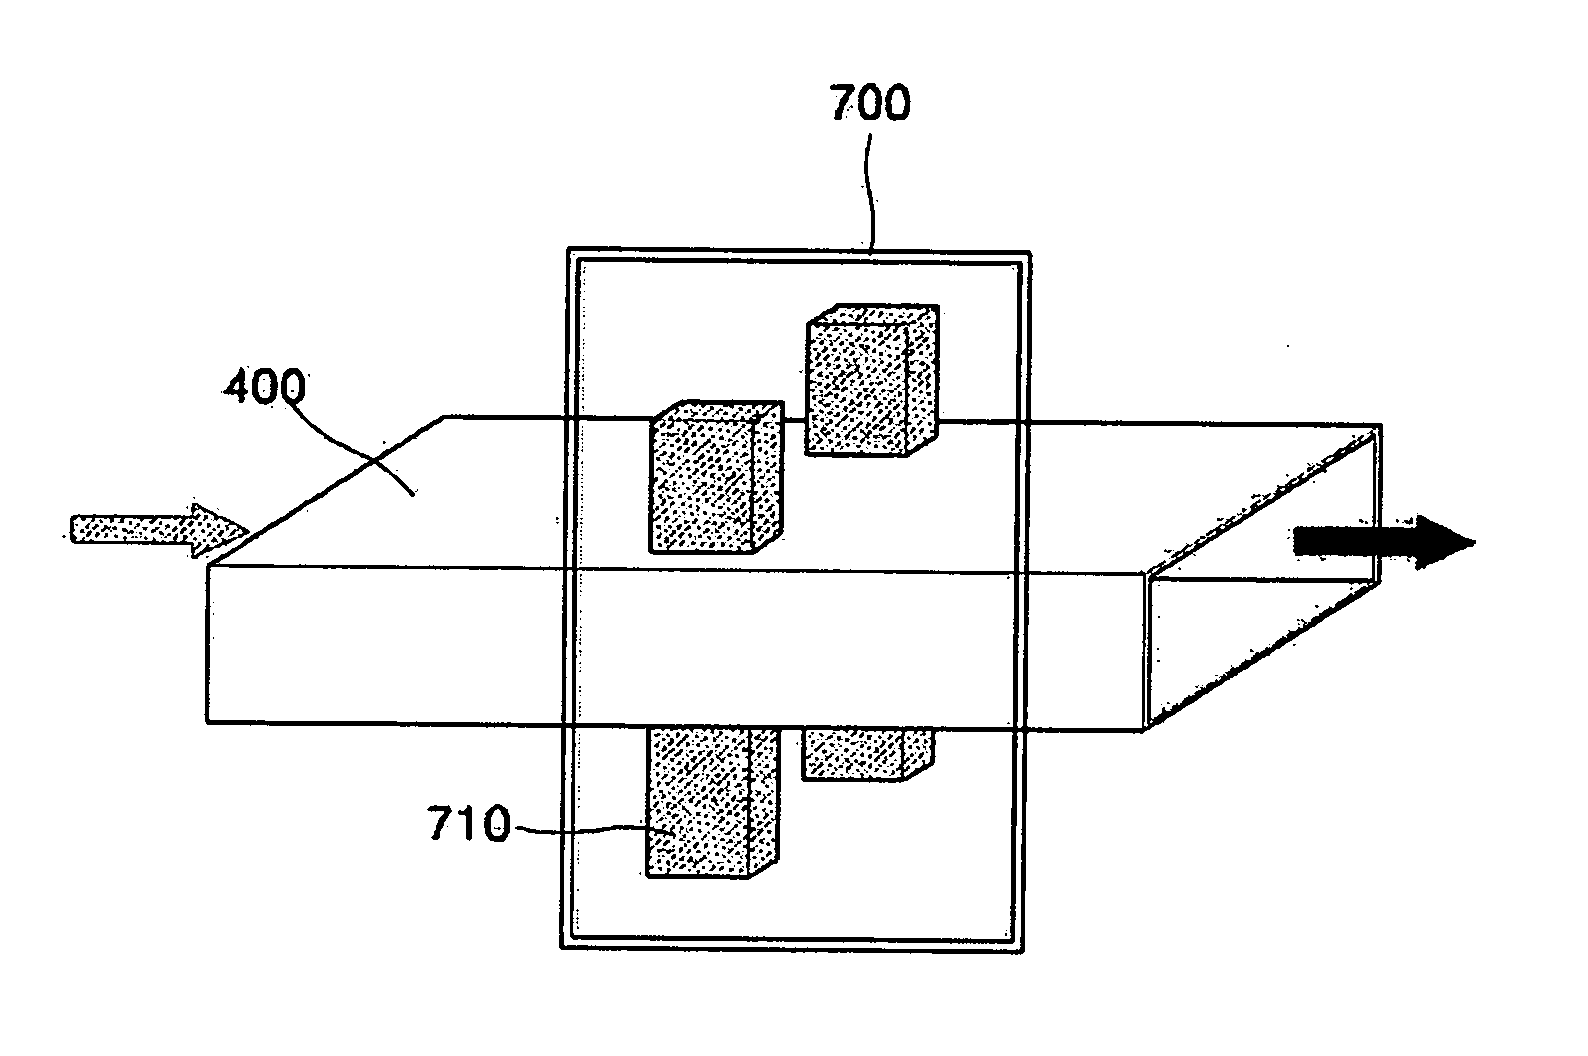 Microfluidic device including microchannel on which plurality of electromagnets are disposed, and methods of mixing sample and lysing cells using the microfluidic device